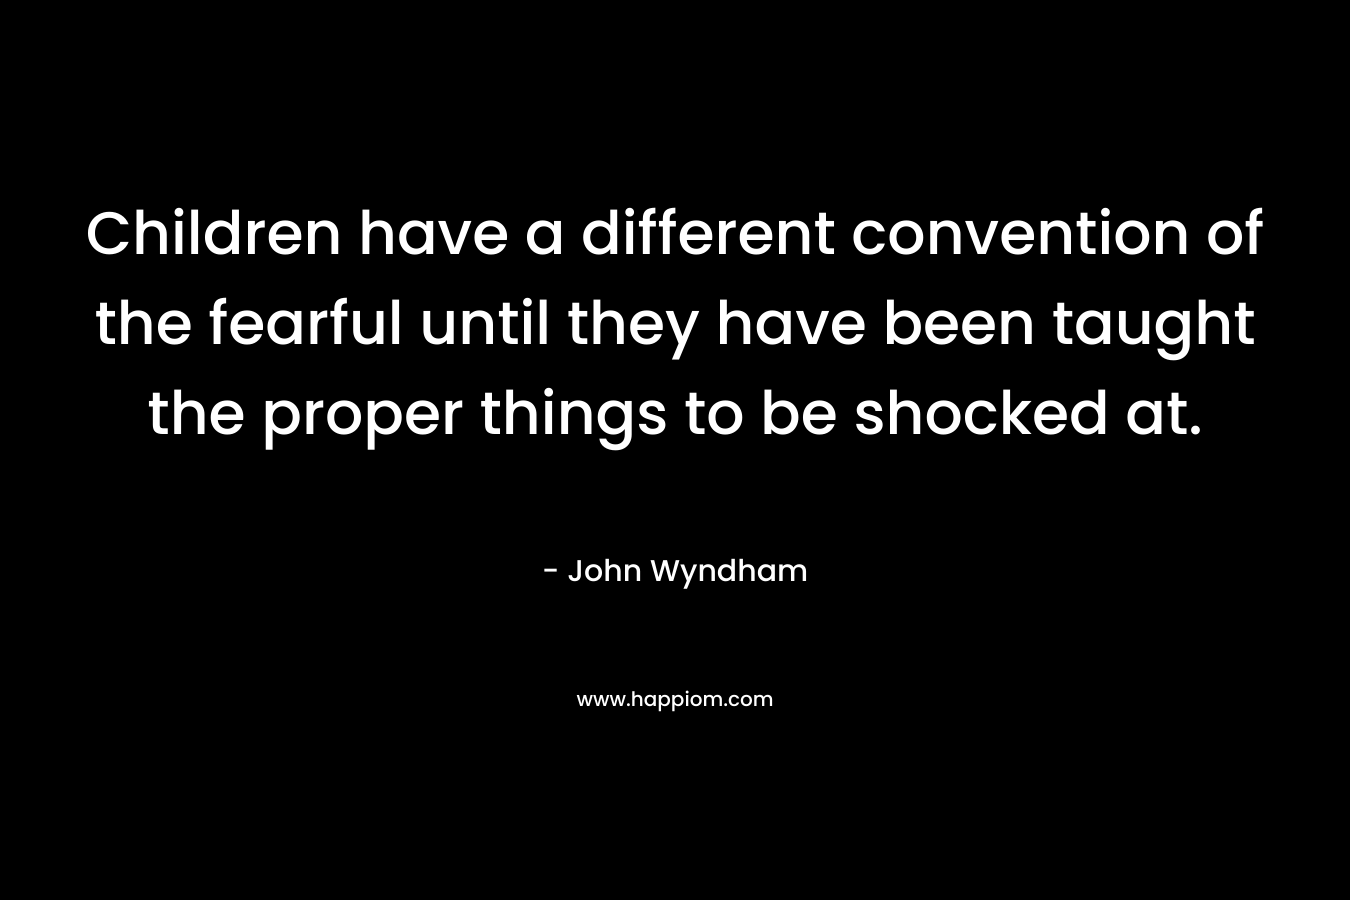 Children have a different convention of the fearful until they have been taught the proper things to be shocked at. – John Wyndham